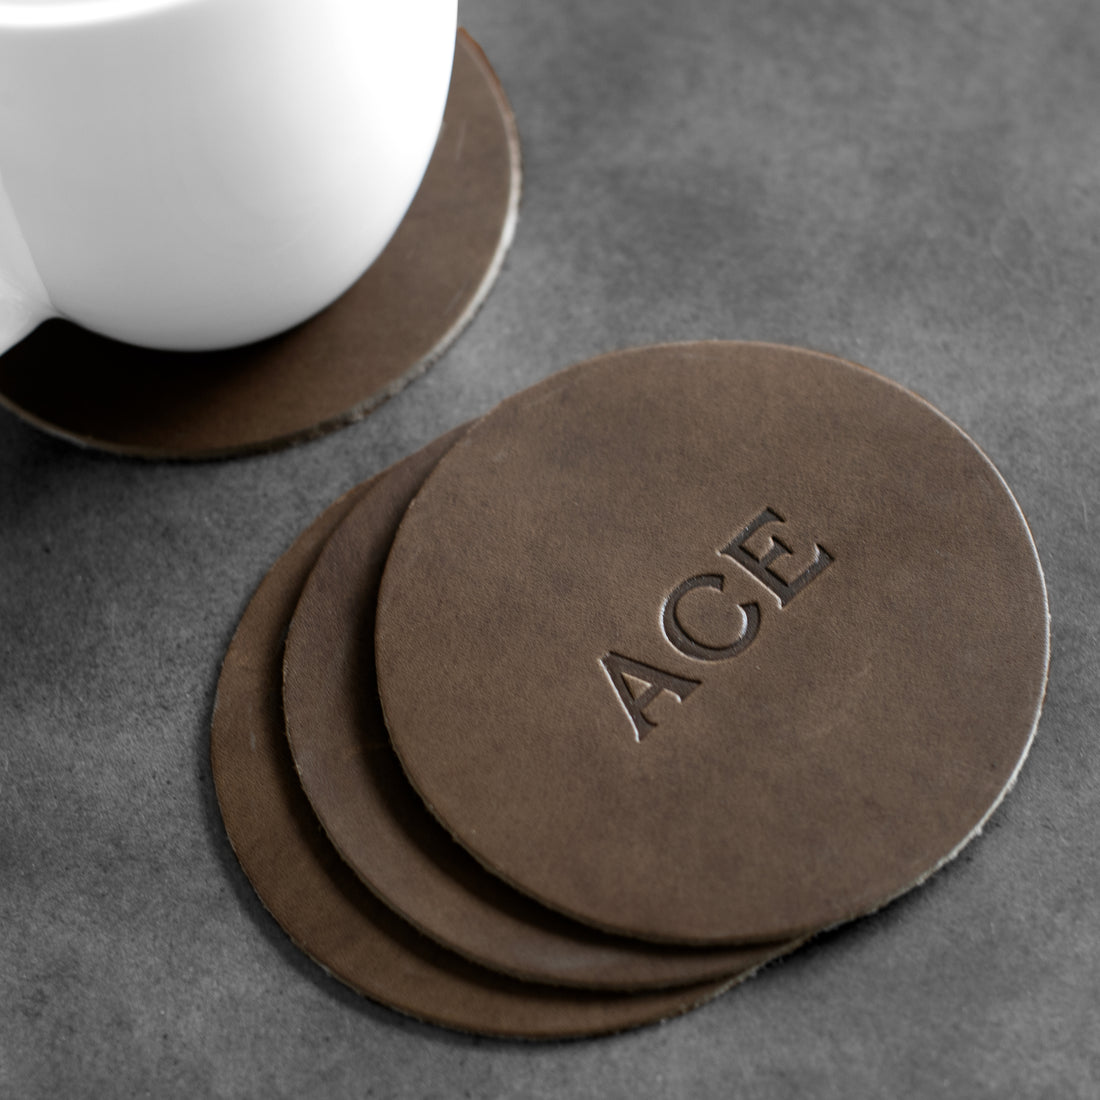 Customizable Wooden Square Coasters - Monogram - Set of 4 Coasters Only